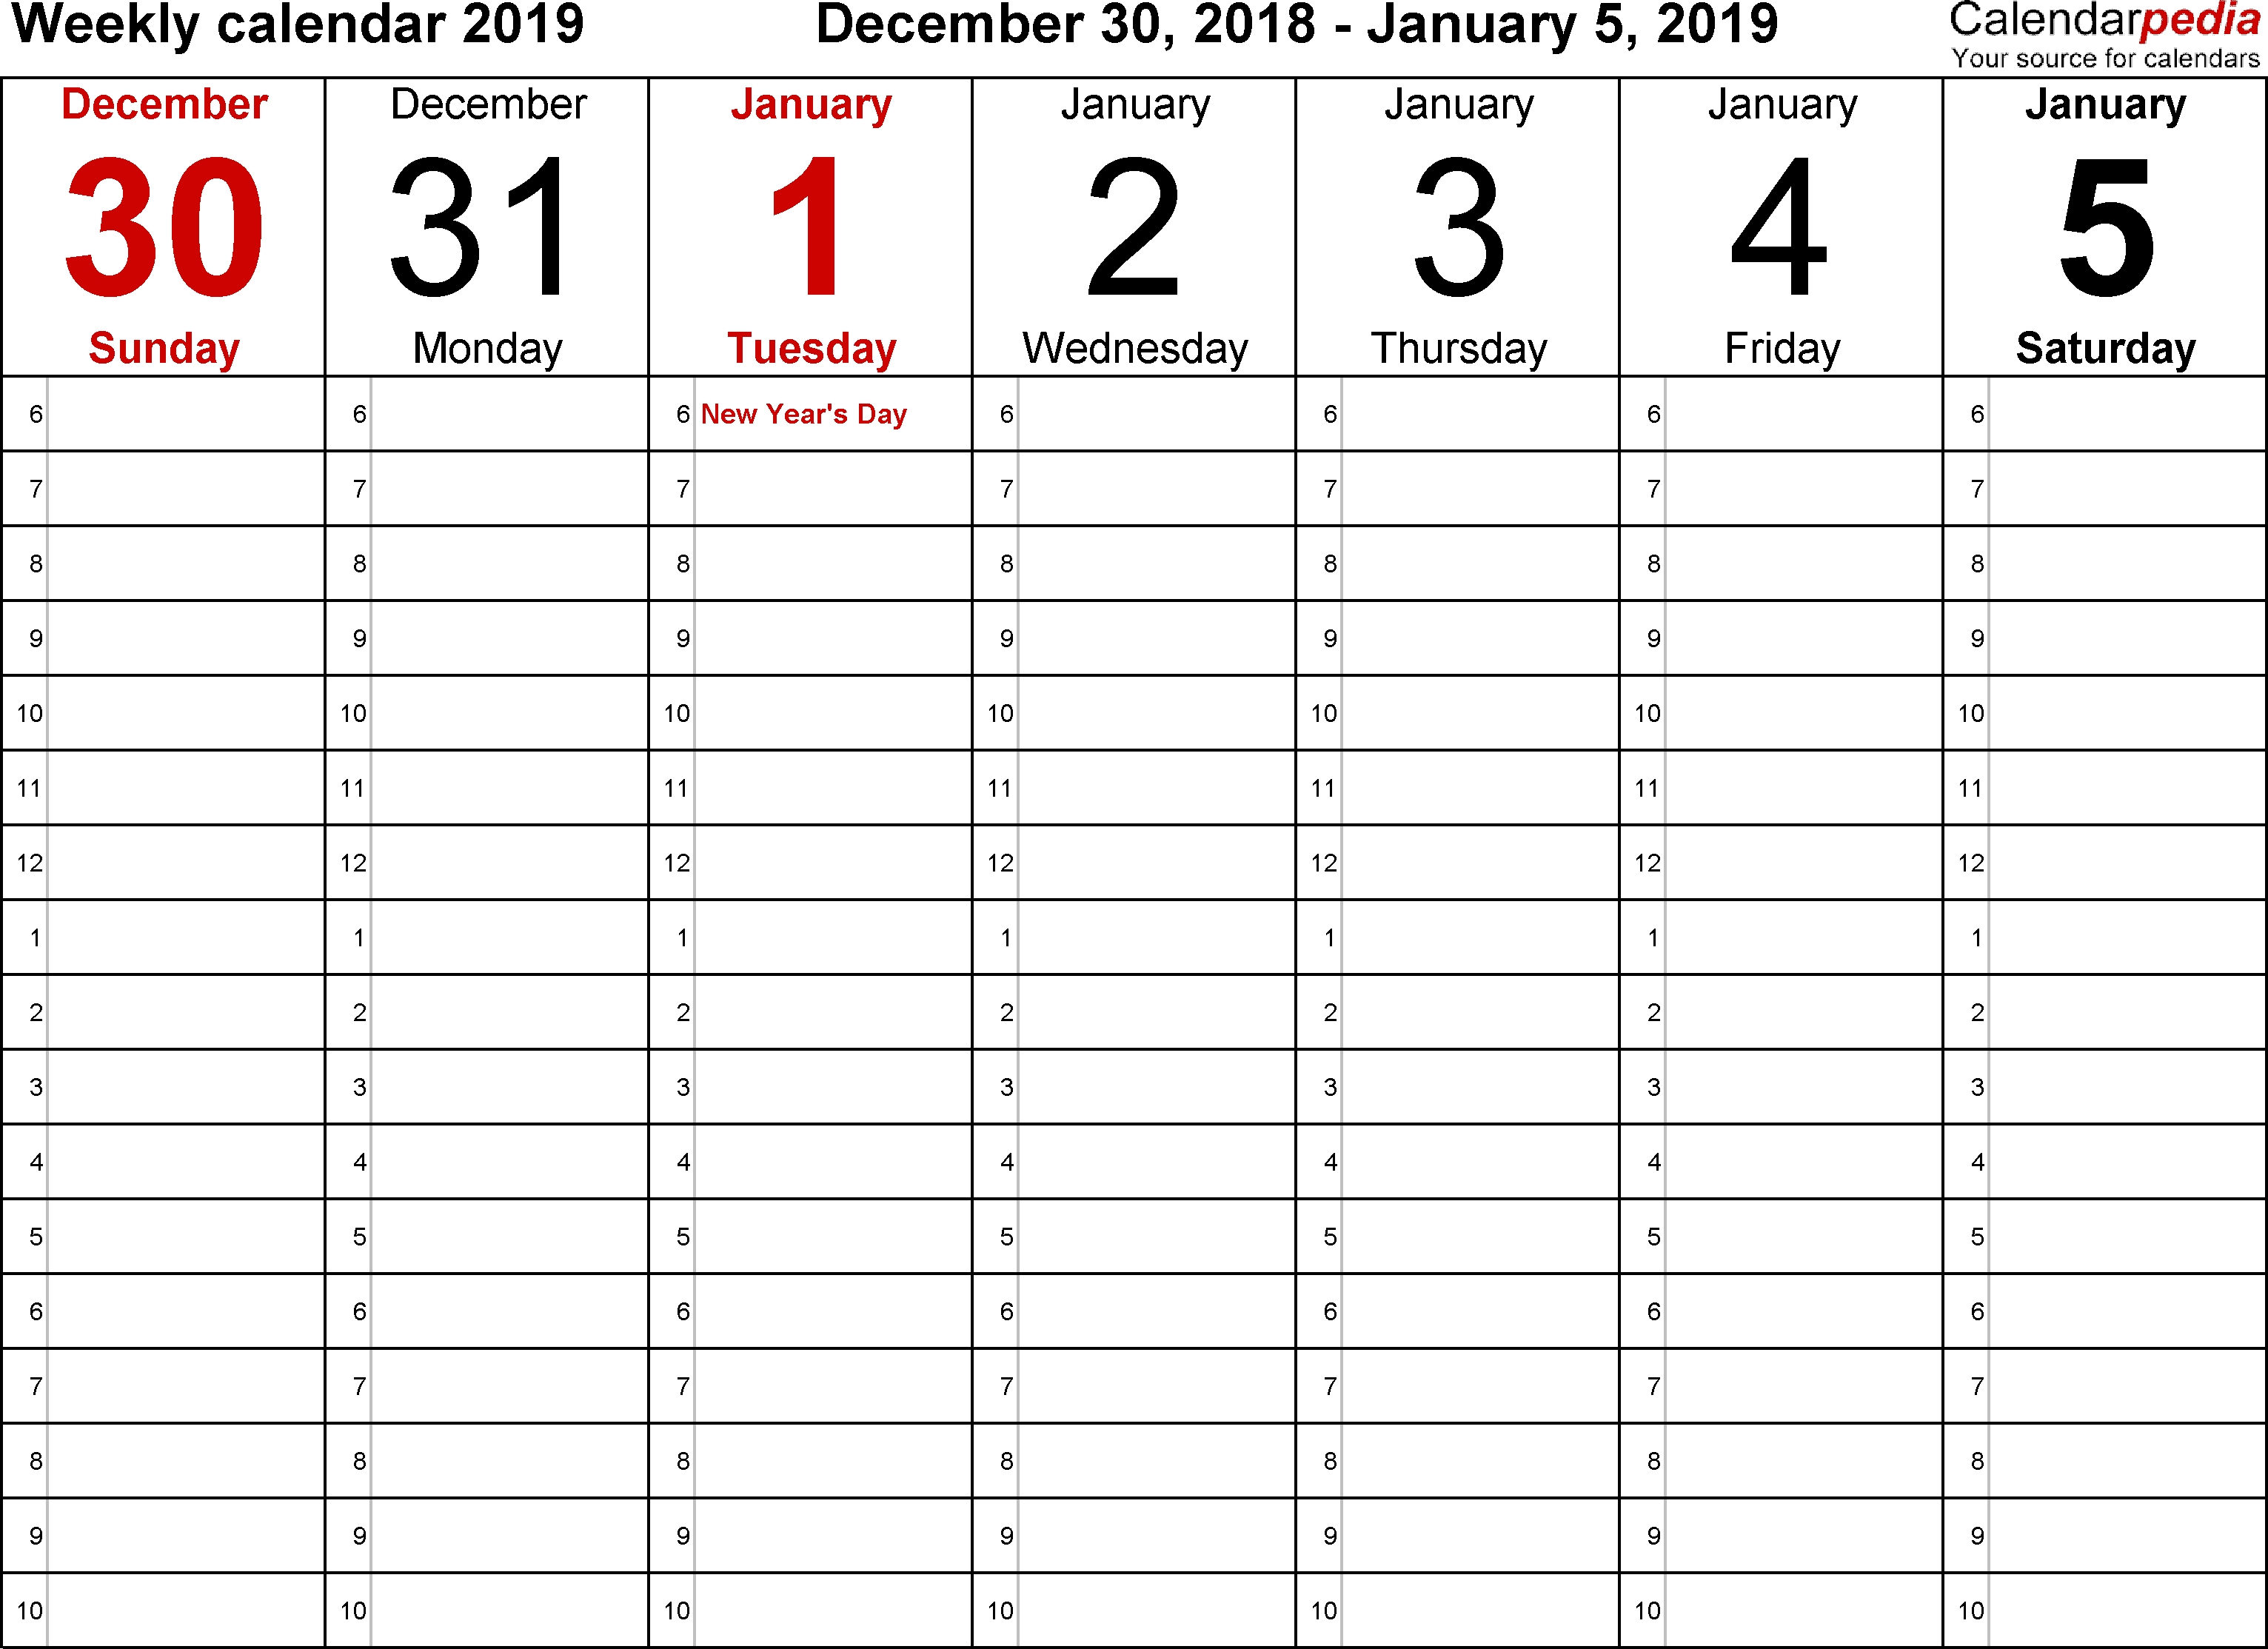 Weekly Calendar 2019 For Word - 12 Free Printable Templates in Blank 7-Day Calendar With Time